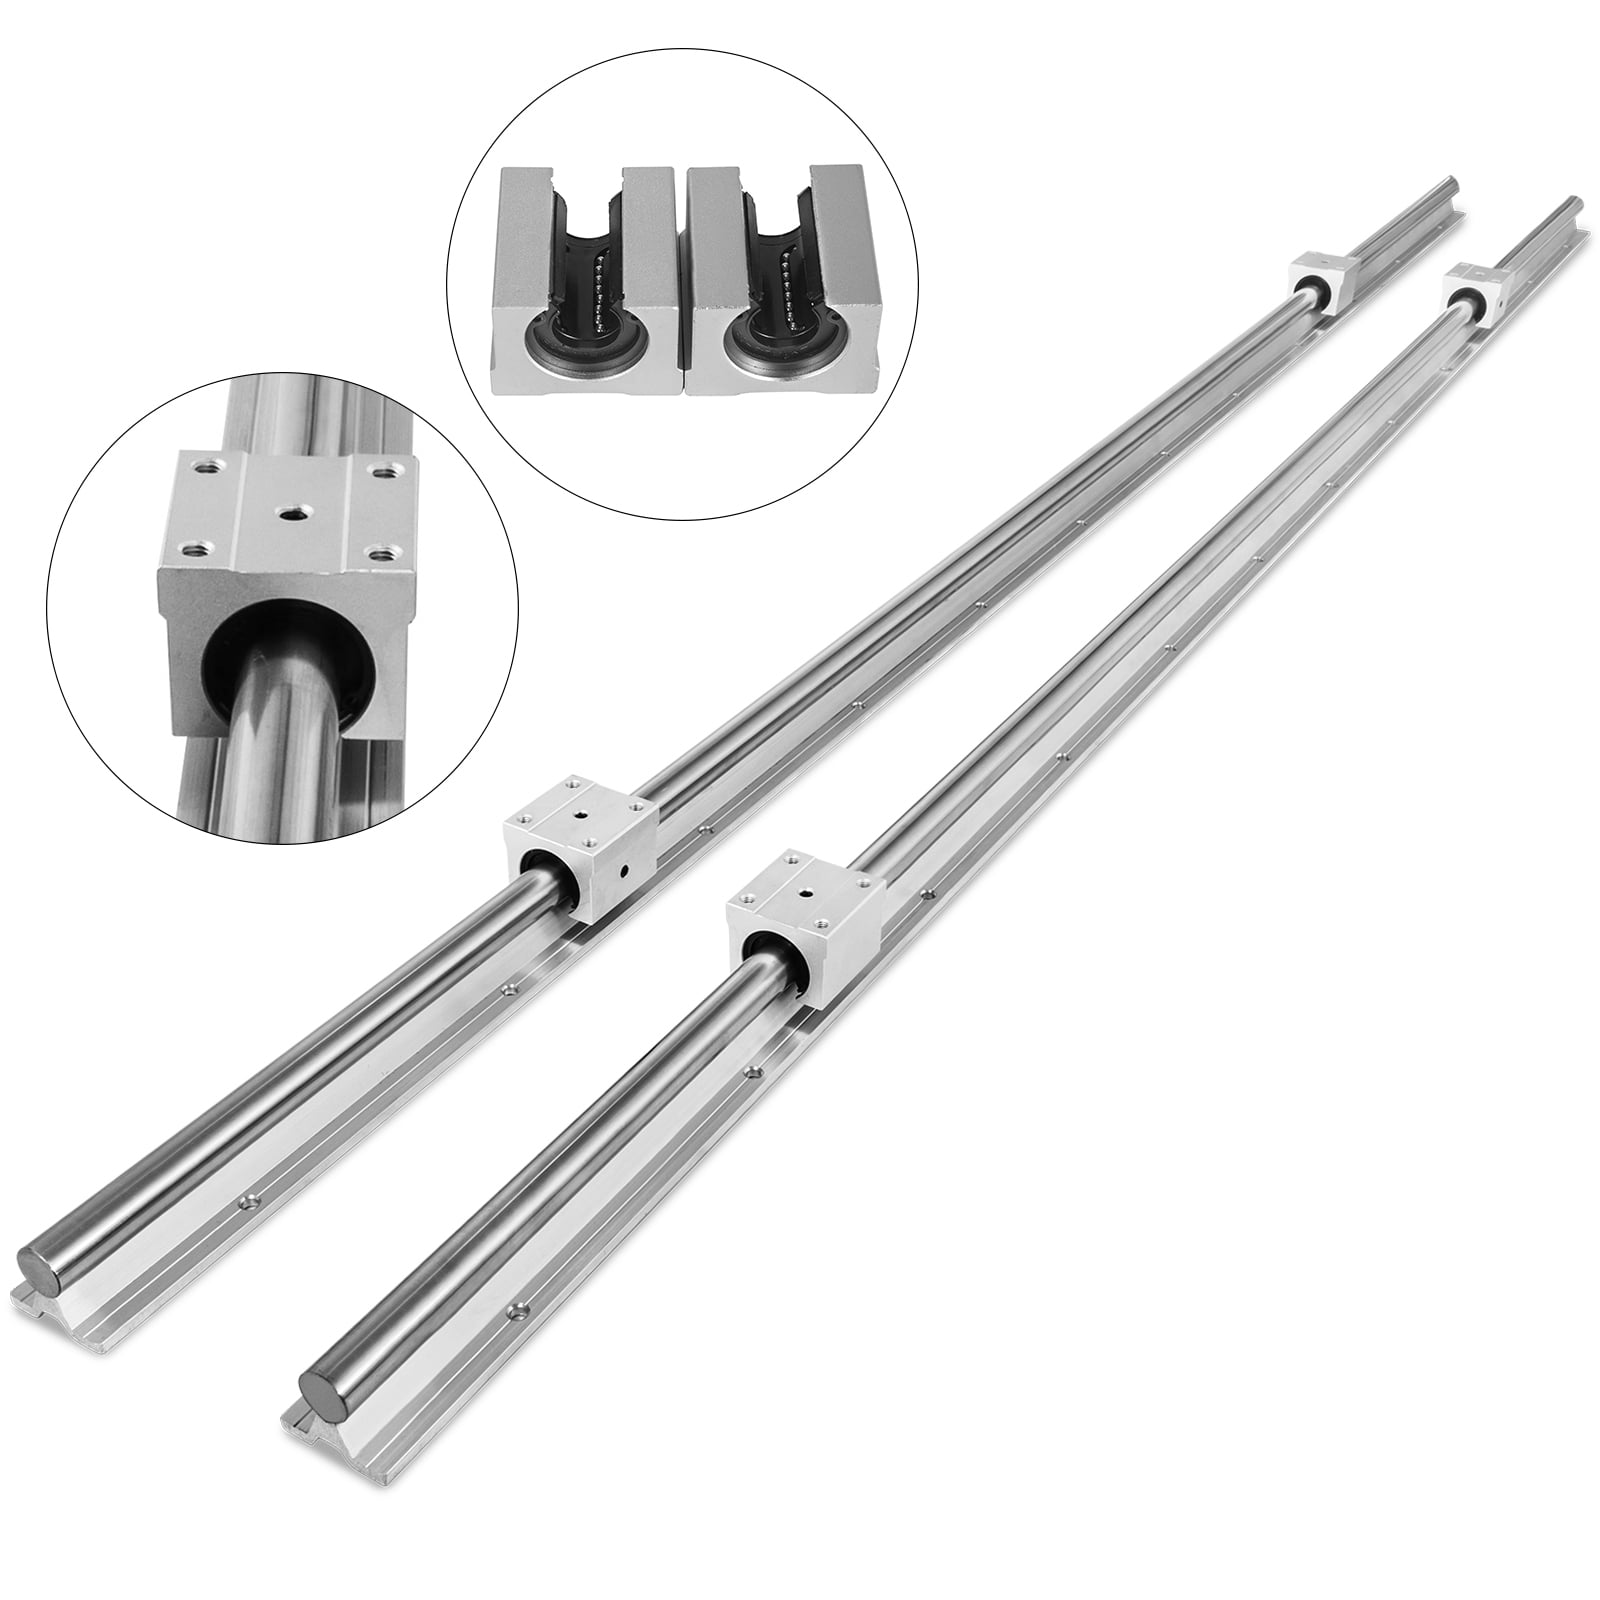 2 x Linear Rail SBR 20-1000mm Support CNC Set Square Type linear Slide Guide 